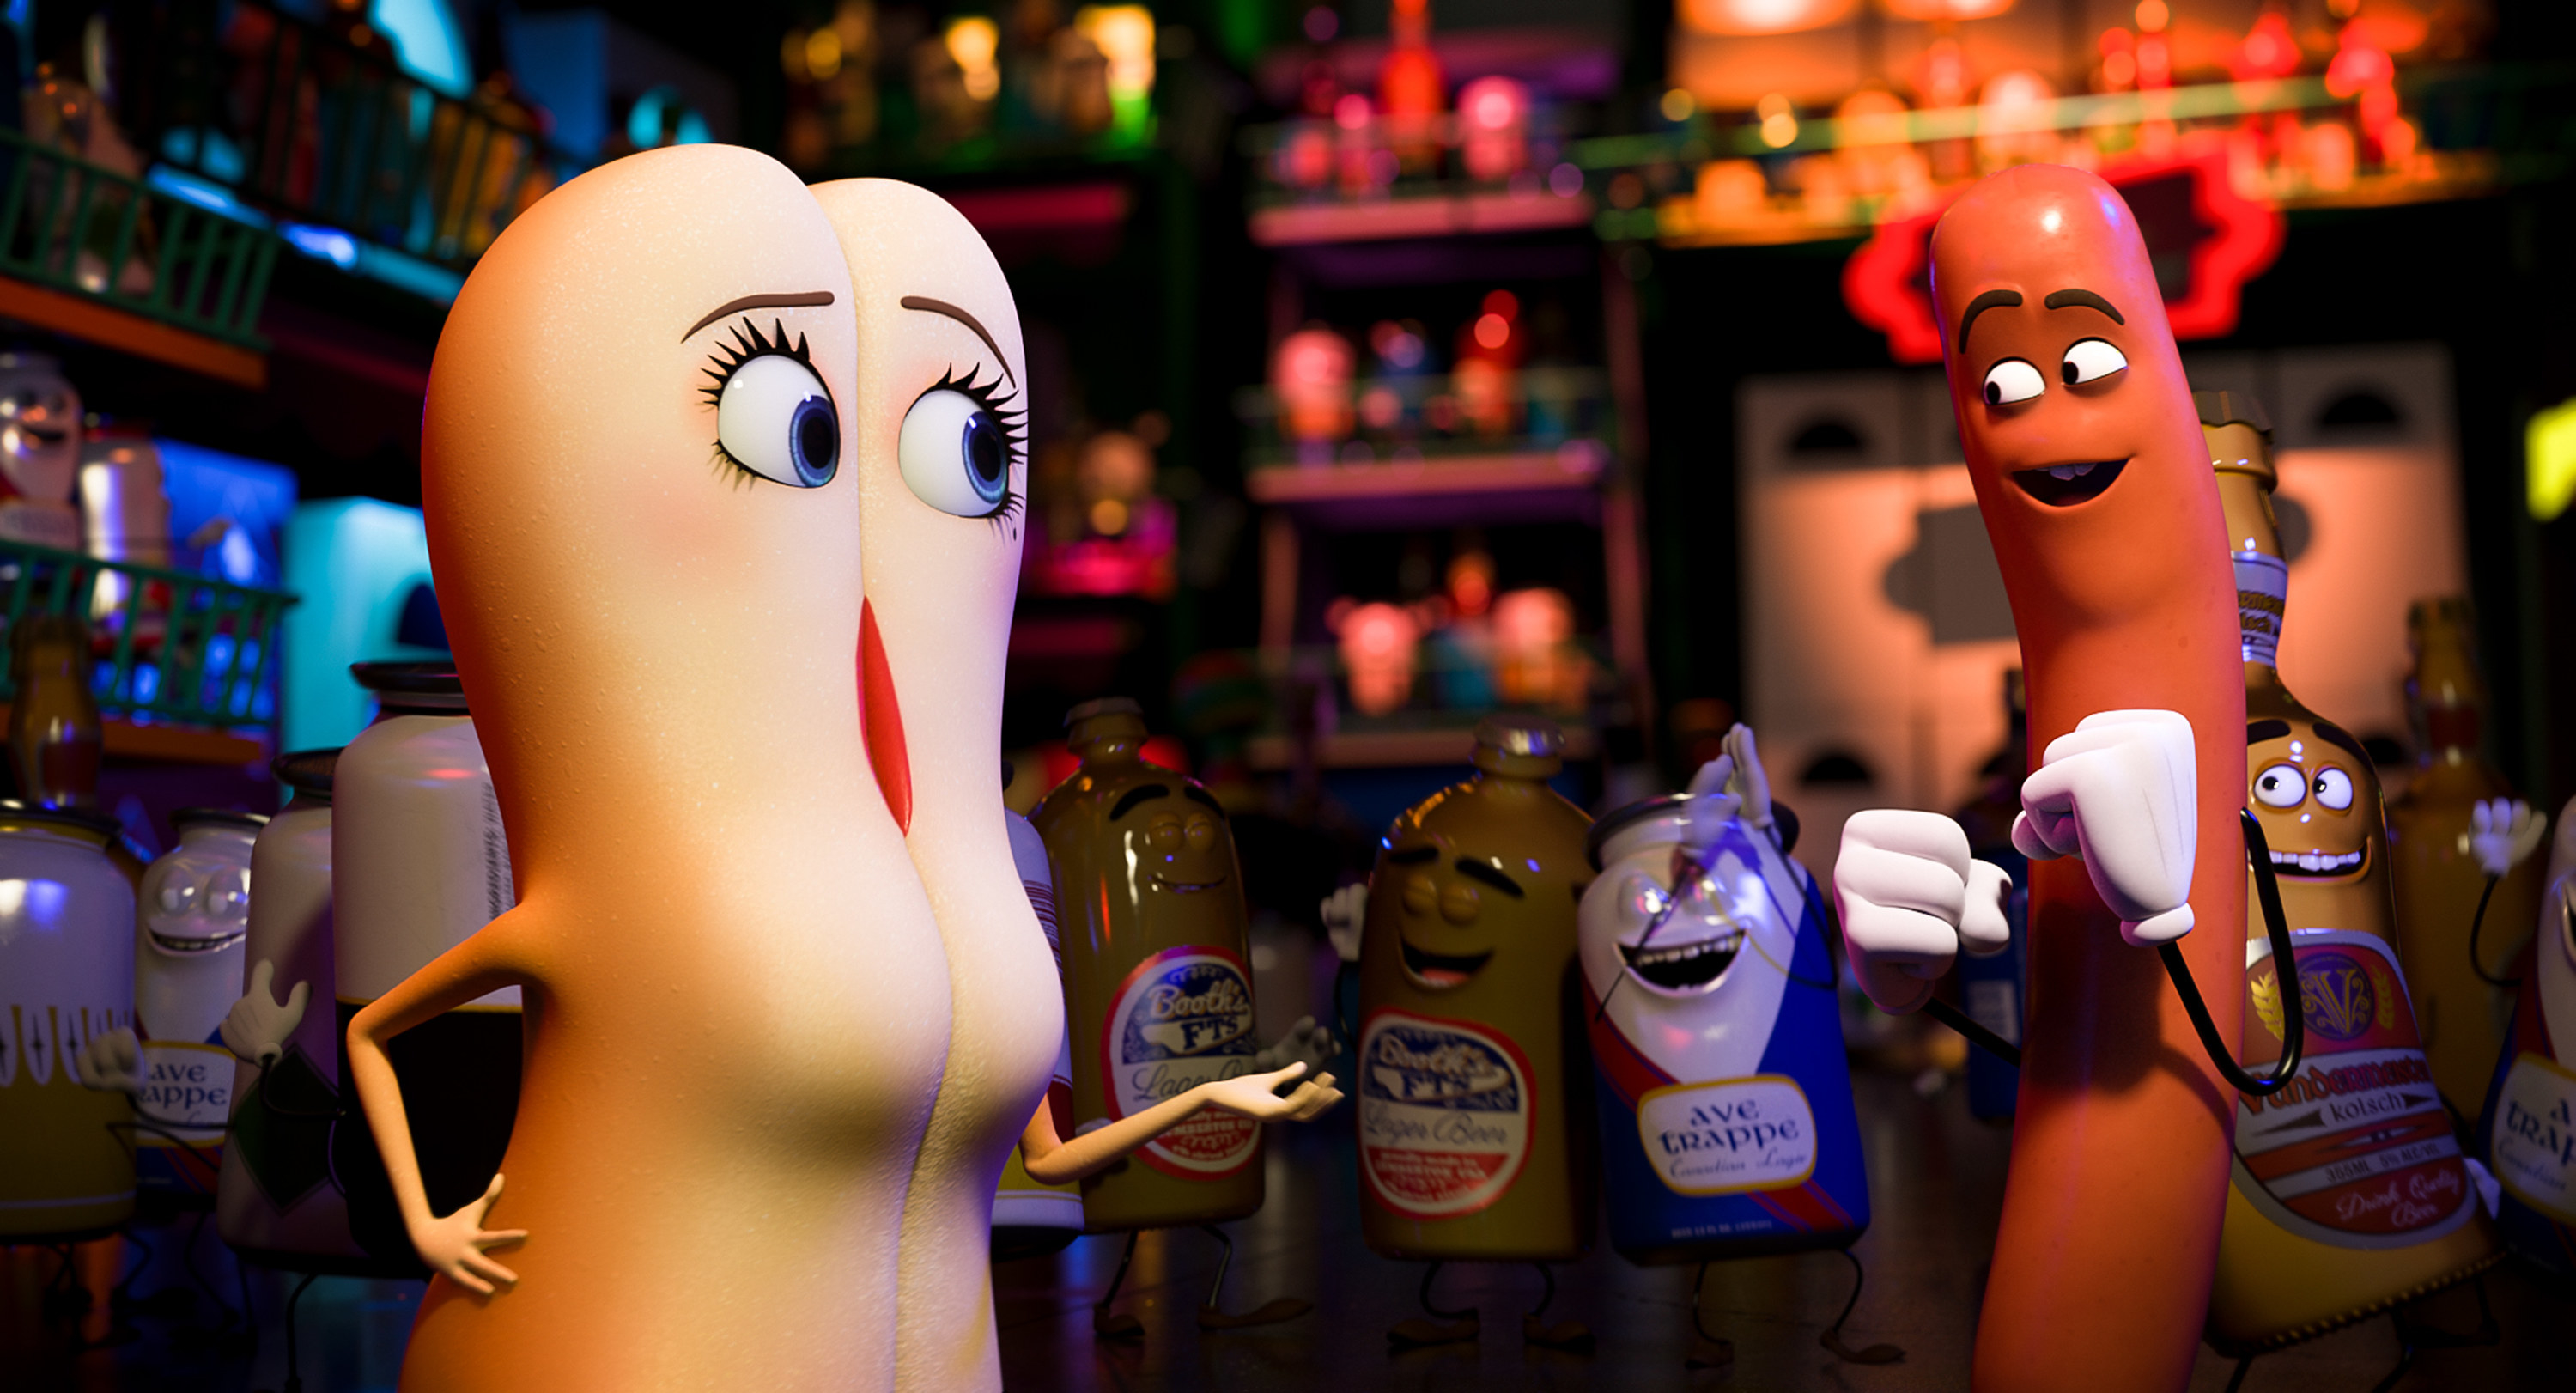 scene from the movie with the condiments laughing along with the hot dog and bun